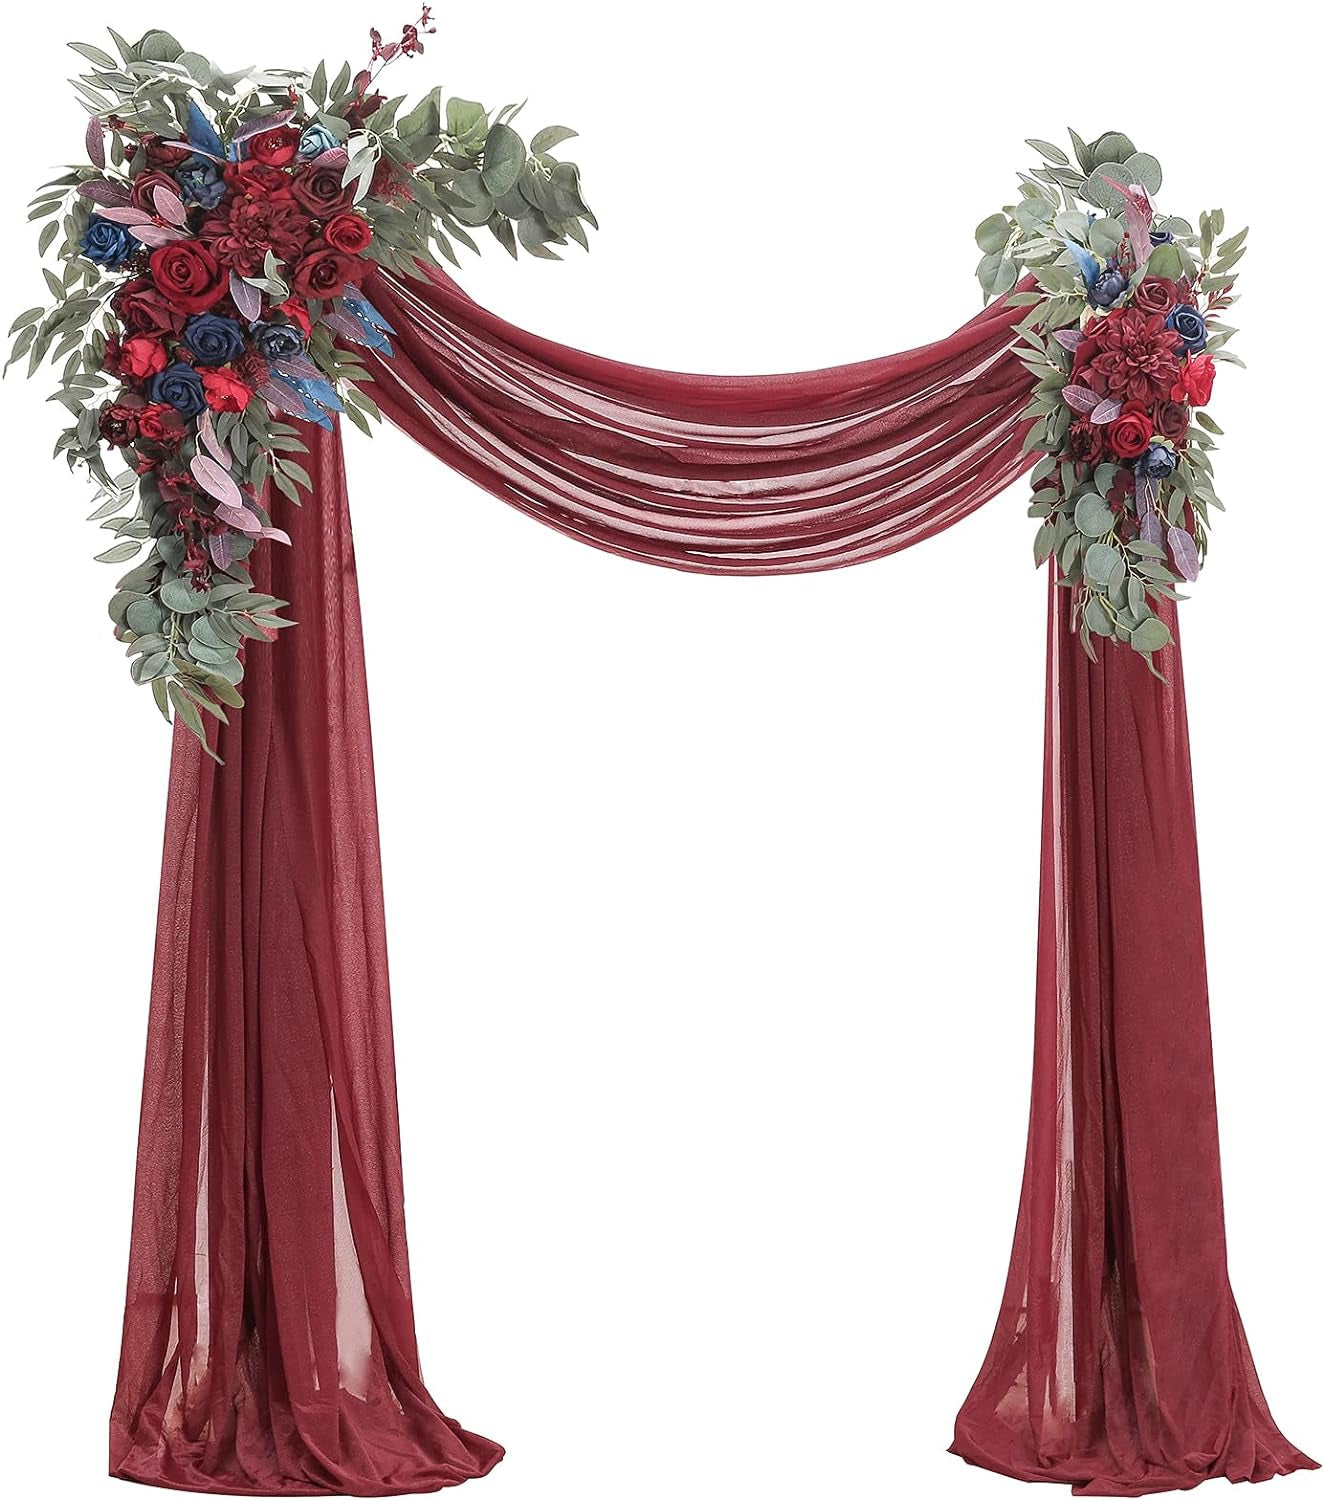 Floroom Arch Flowers with Drapes Kit (Pack of 4) - 2Pcs Artificial Dusty Rose & Blush Floral Swag Arrangement with 2Pcs Draping Fabric for Wedding Ceremony Arbor and Reception Backdrop Decoration